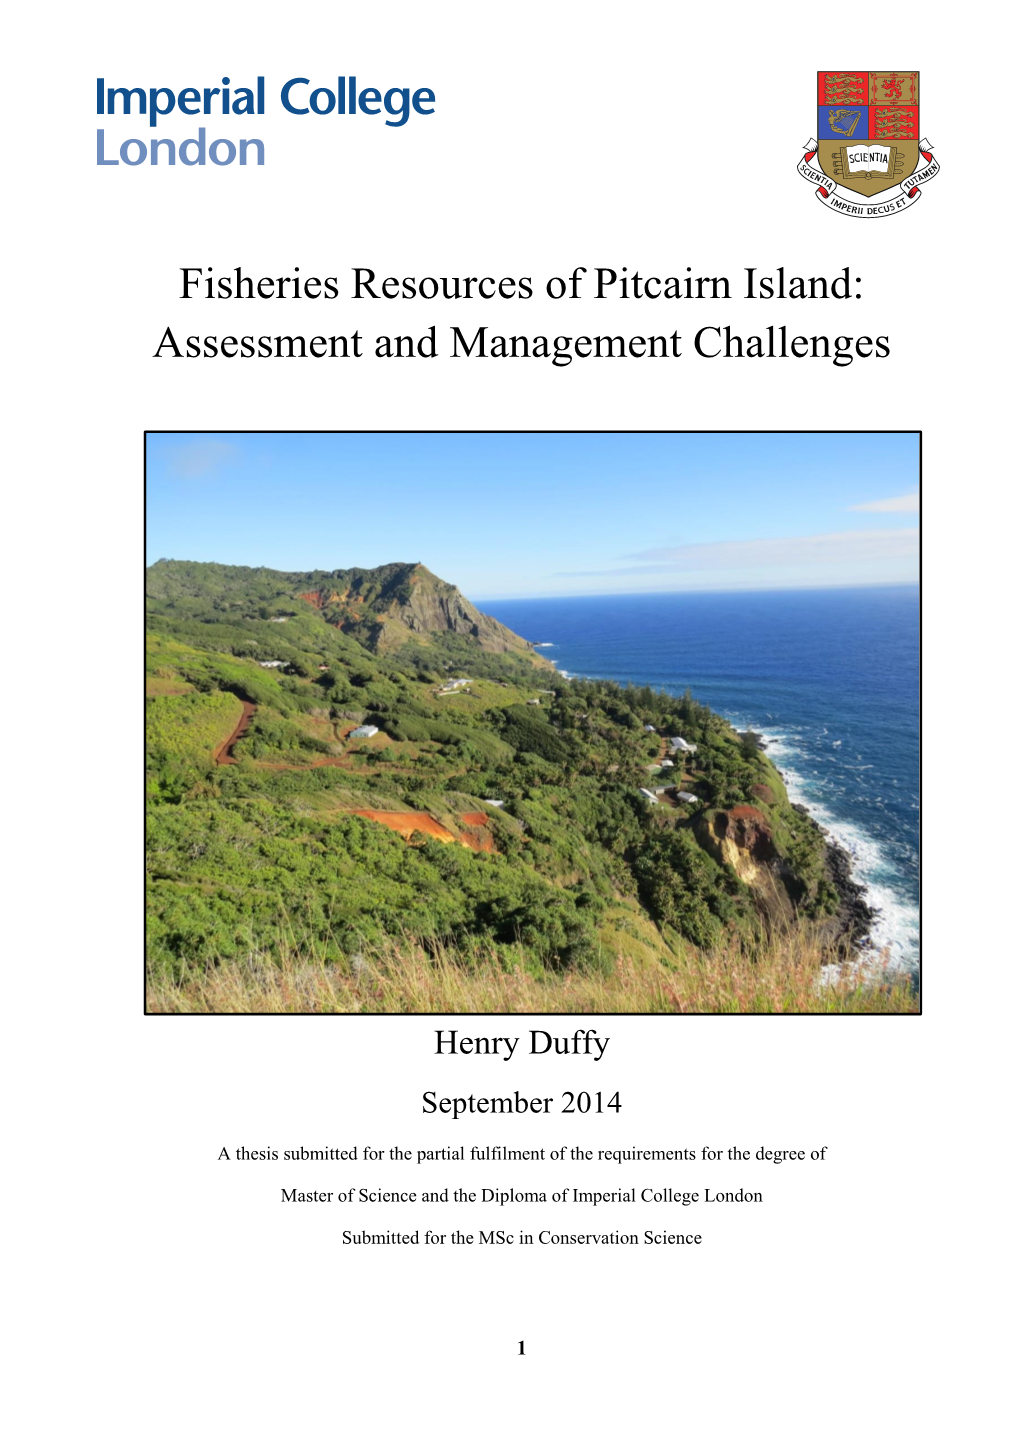 Fisheries Resources of Pitcairn Island: Assessment and Management Challenges